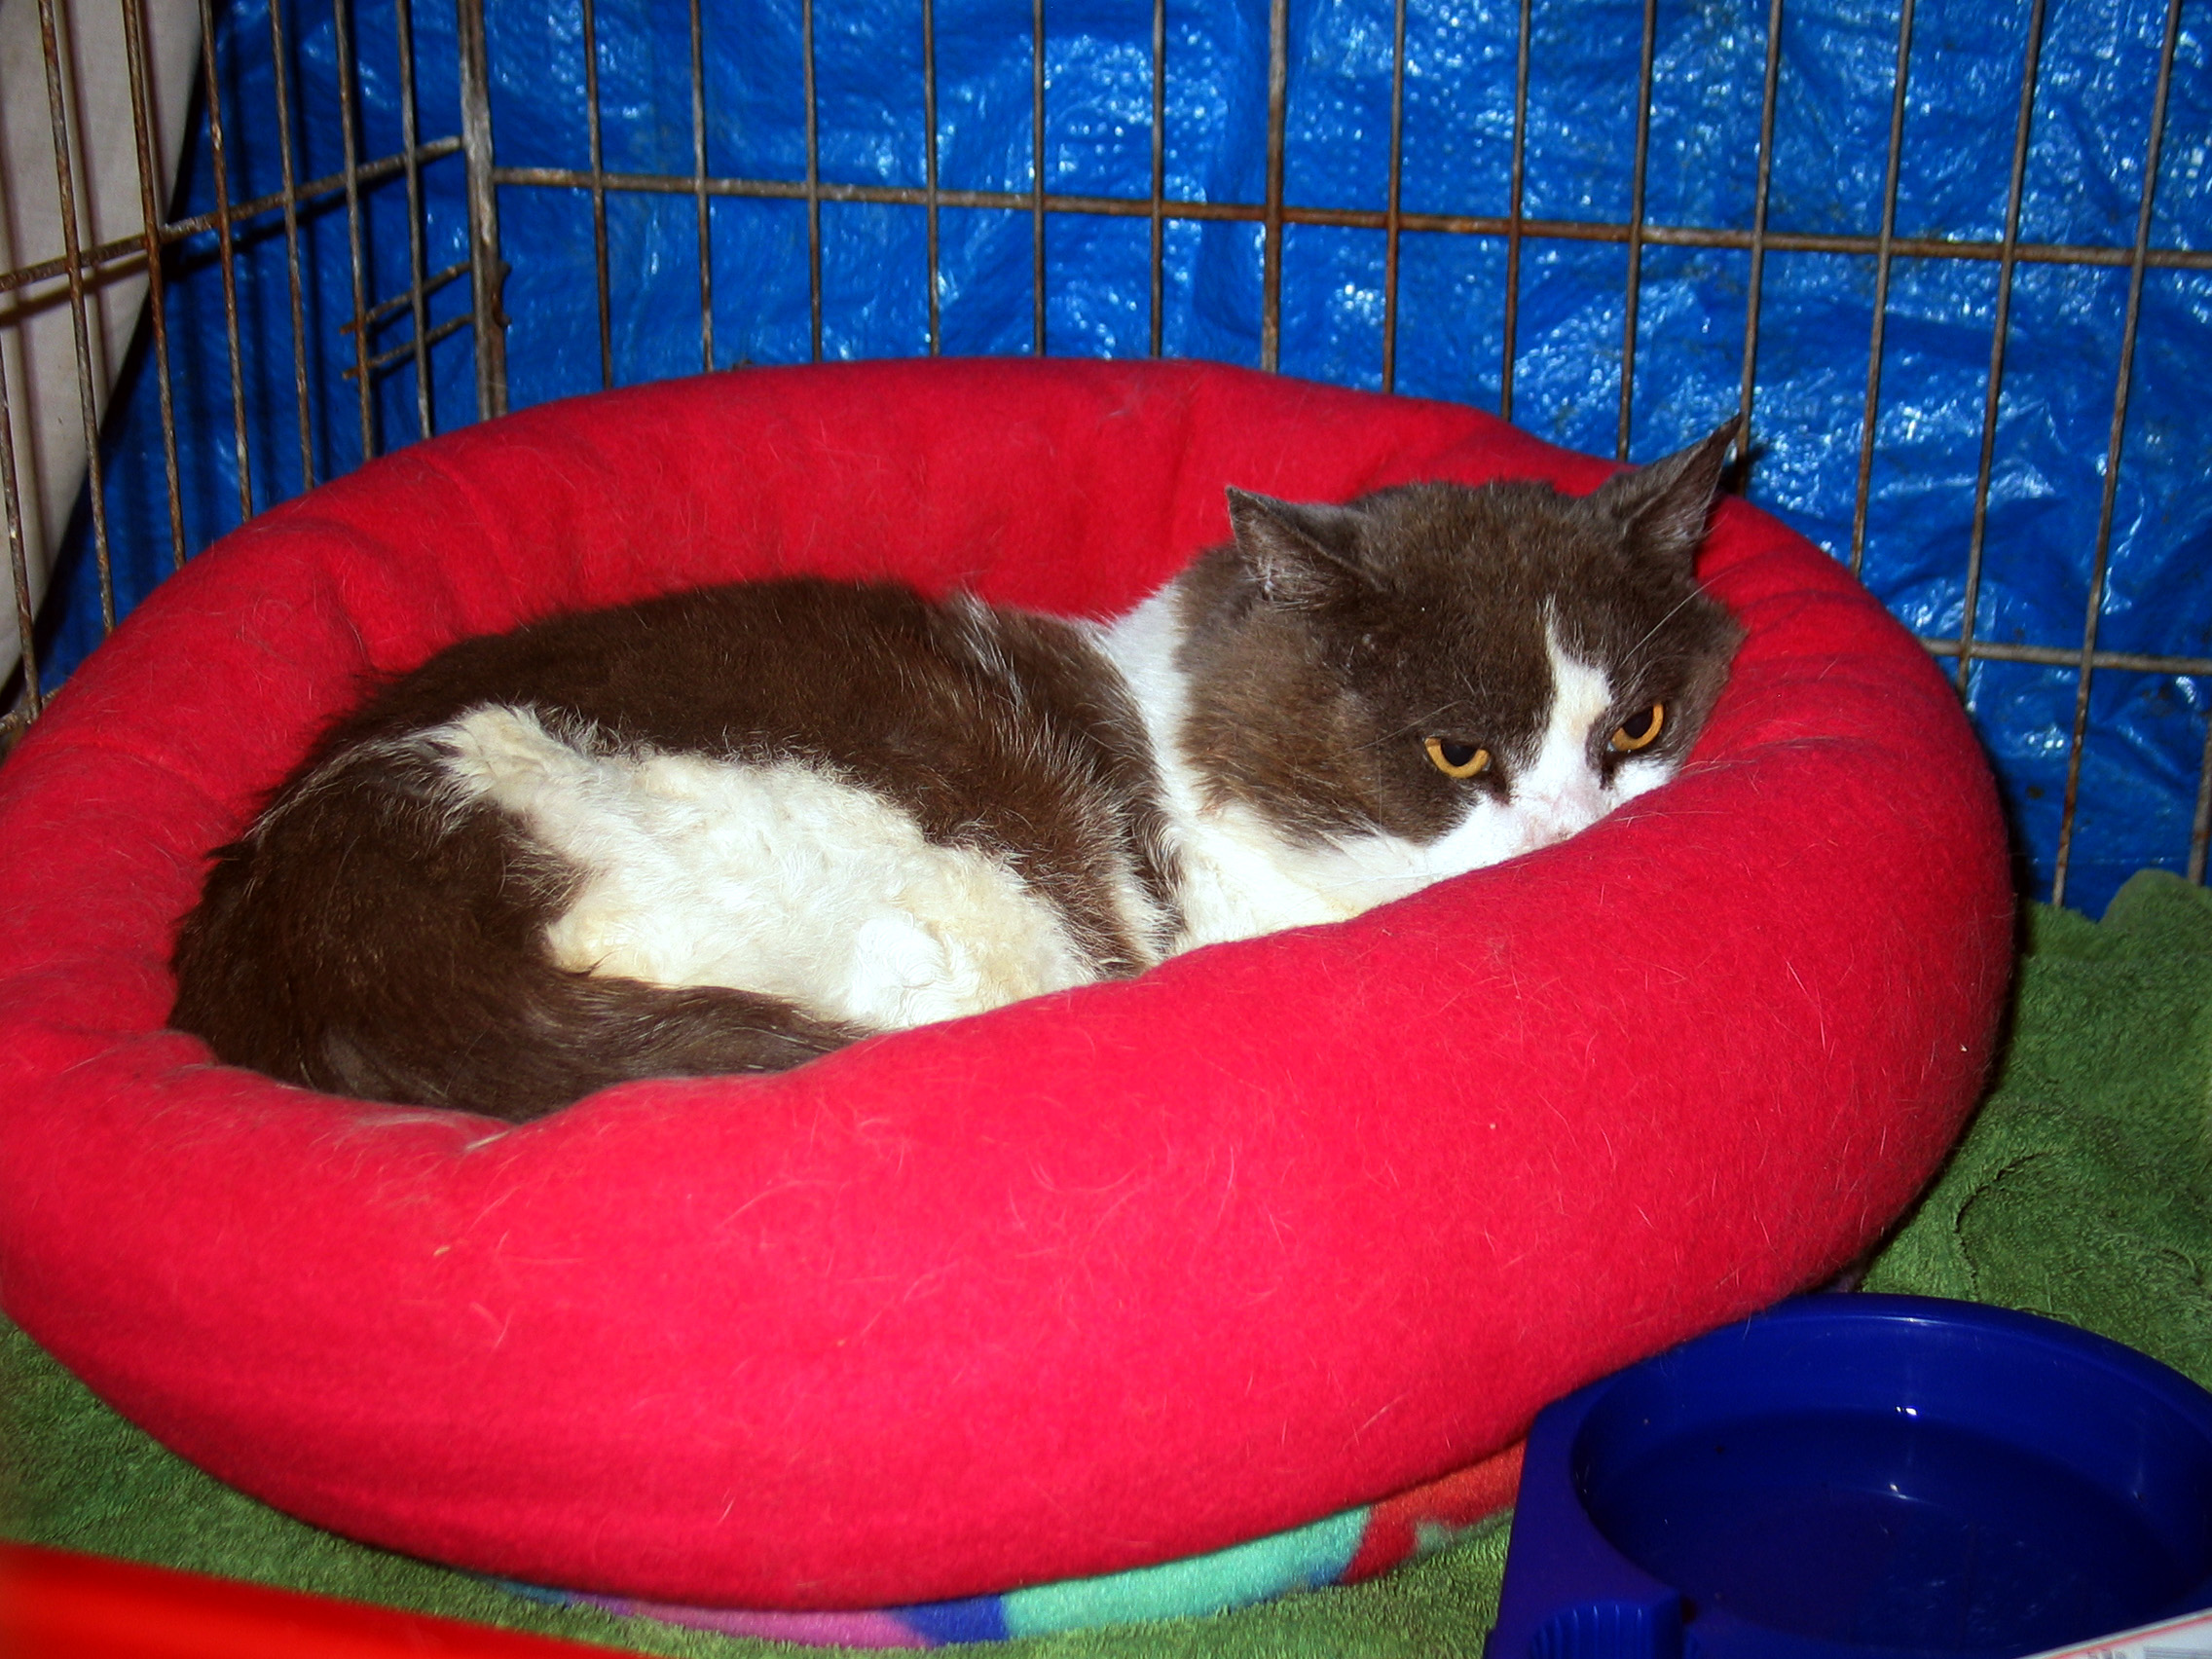 Grendel glares balefully from his new bed.